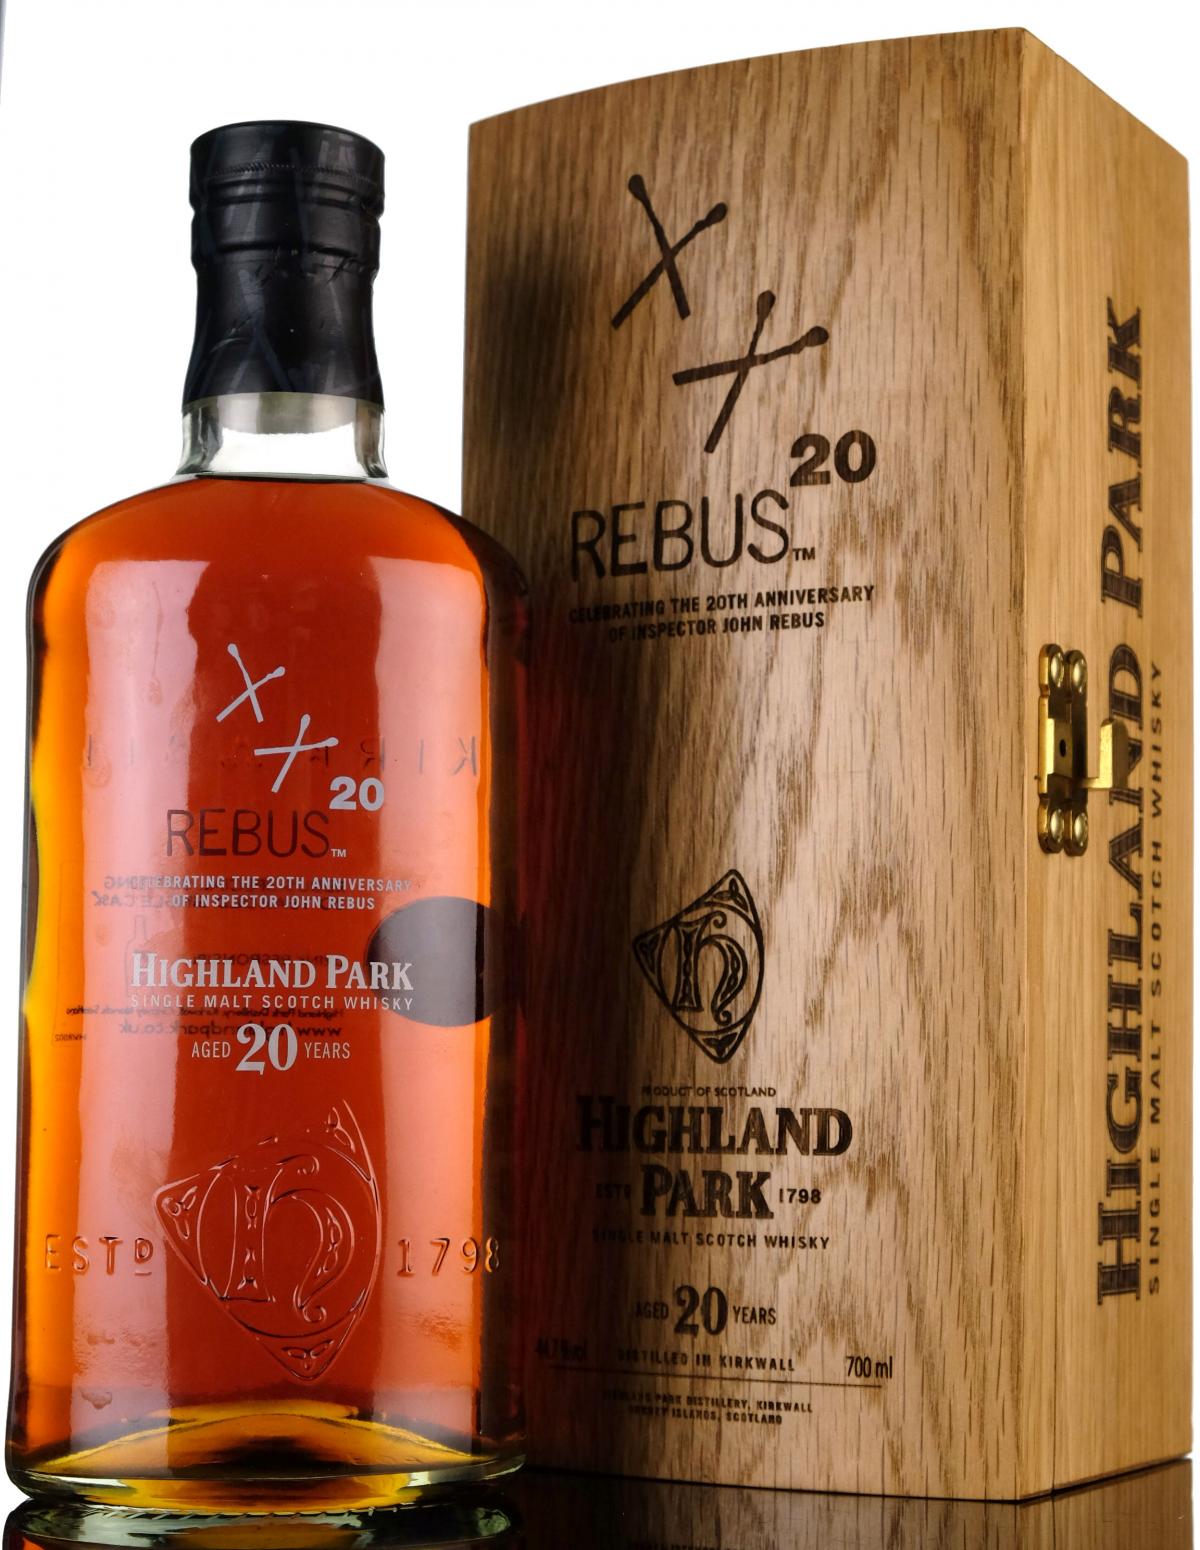 Highland Park 20 Year Old - Single Cask - Rebus 20th Anniversary